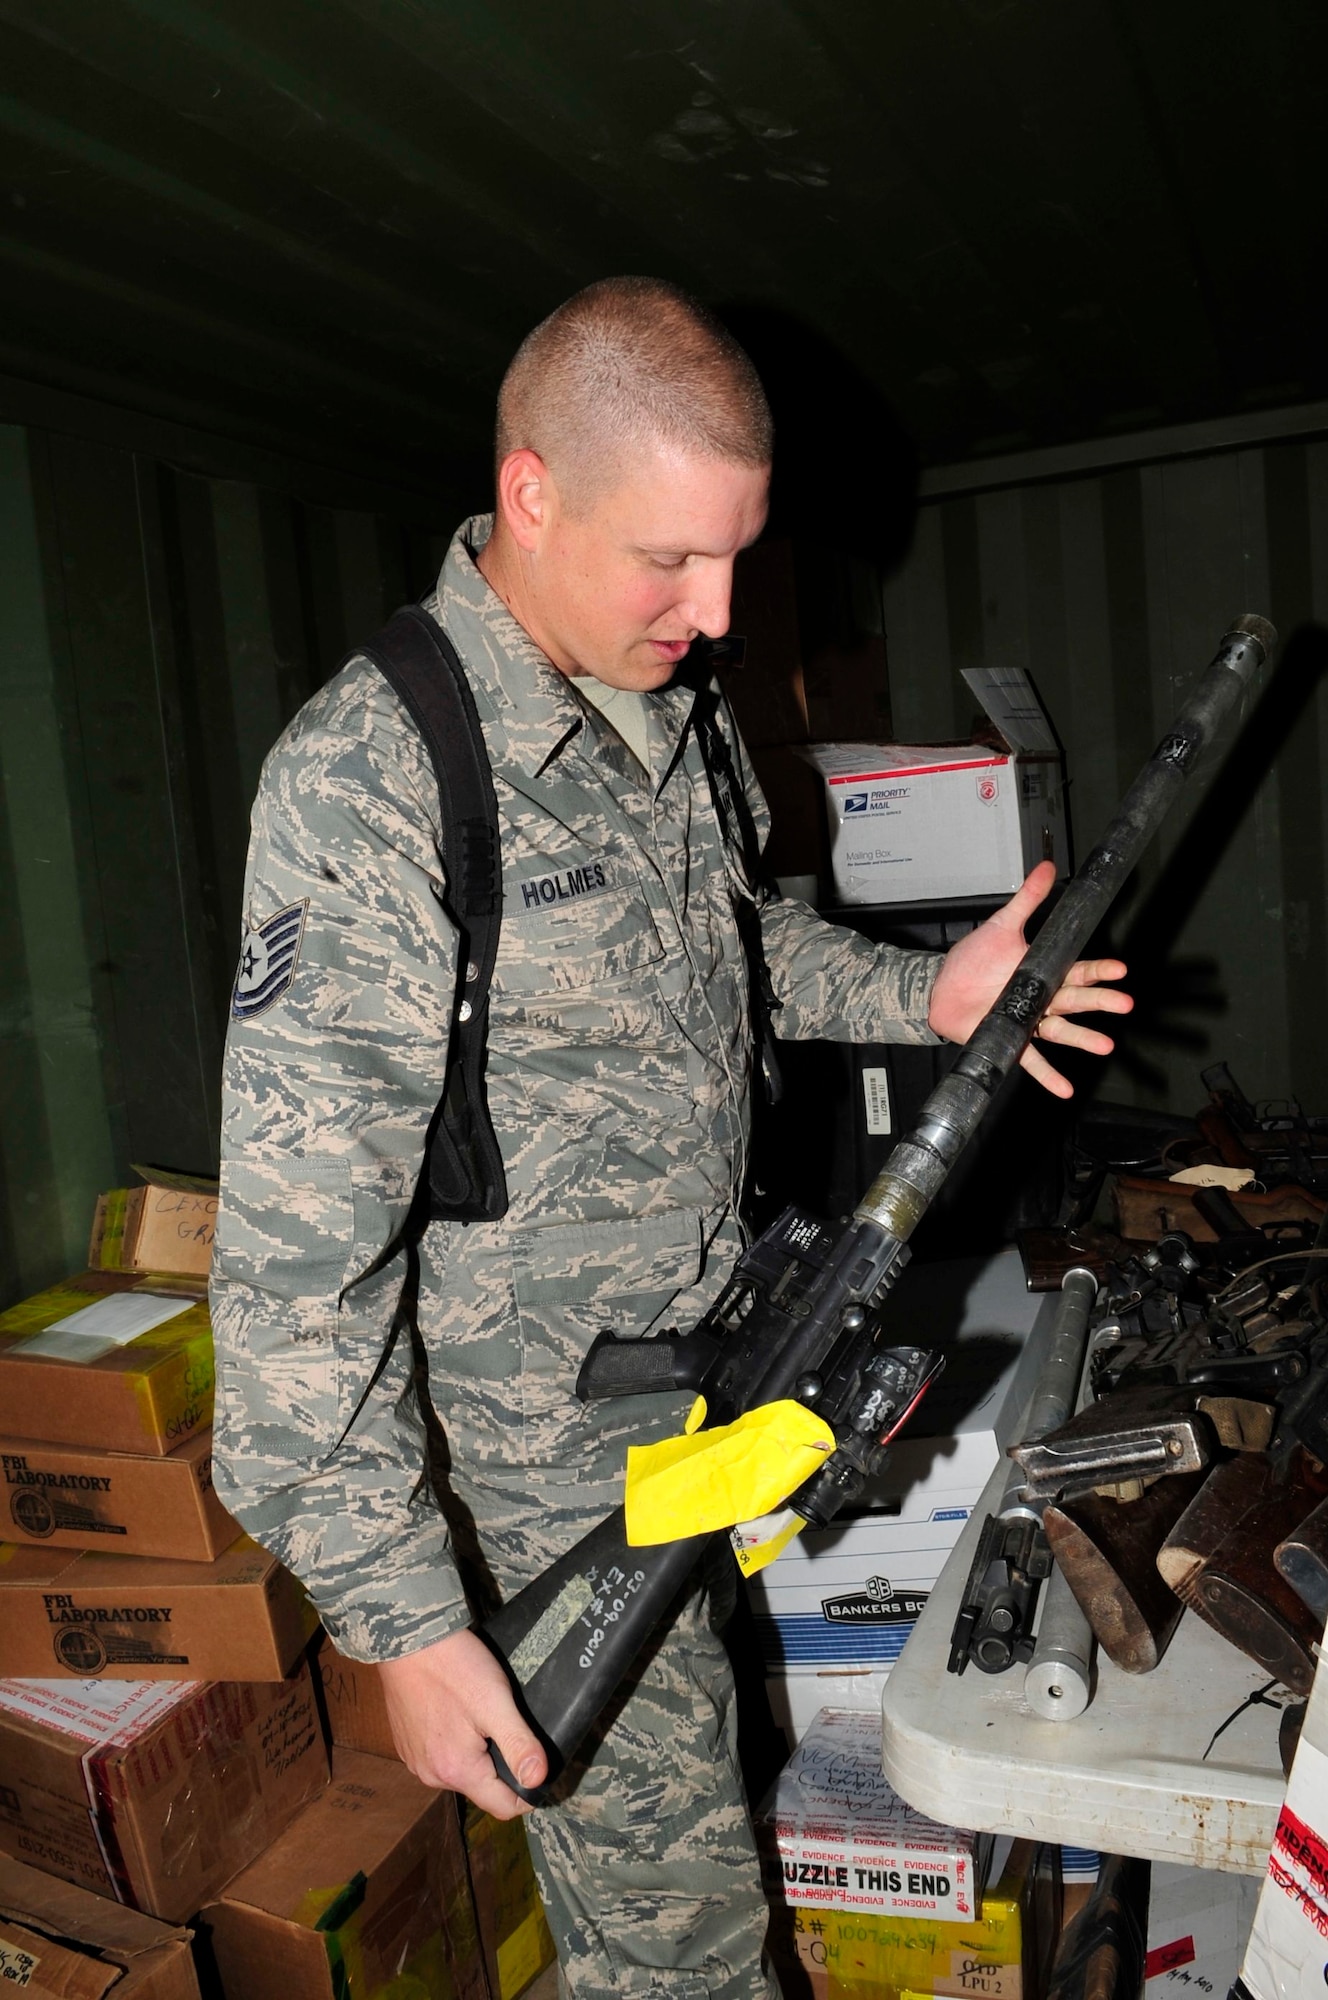 U.S. Air Force Tech. Sgt. Aaron Holmes, Law and Order Task Force paralegal, deployed from Grand Forks Air Force Base, N.D., and native of Cabot, Ark., conducts an inventory of weapons held as evidence at Joint Security Station Shield, Iraq, April 7, 2011. The Cabot, Ark., native safeguards these items to help ensure a fair and impartial trial under Iraq law for detainees accused of criminal and terrorist activity. (U.S. Air Force photo by Senior Master Sgt. Larry A. Schneck/Released)